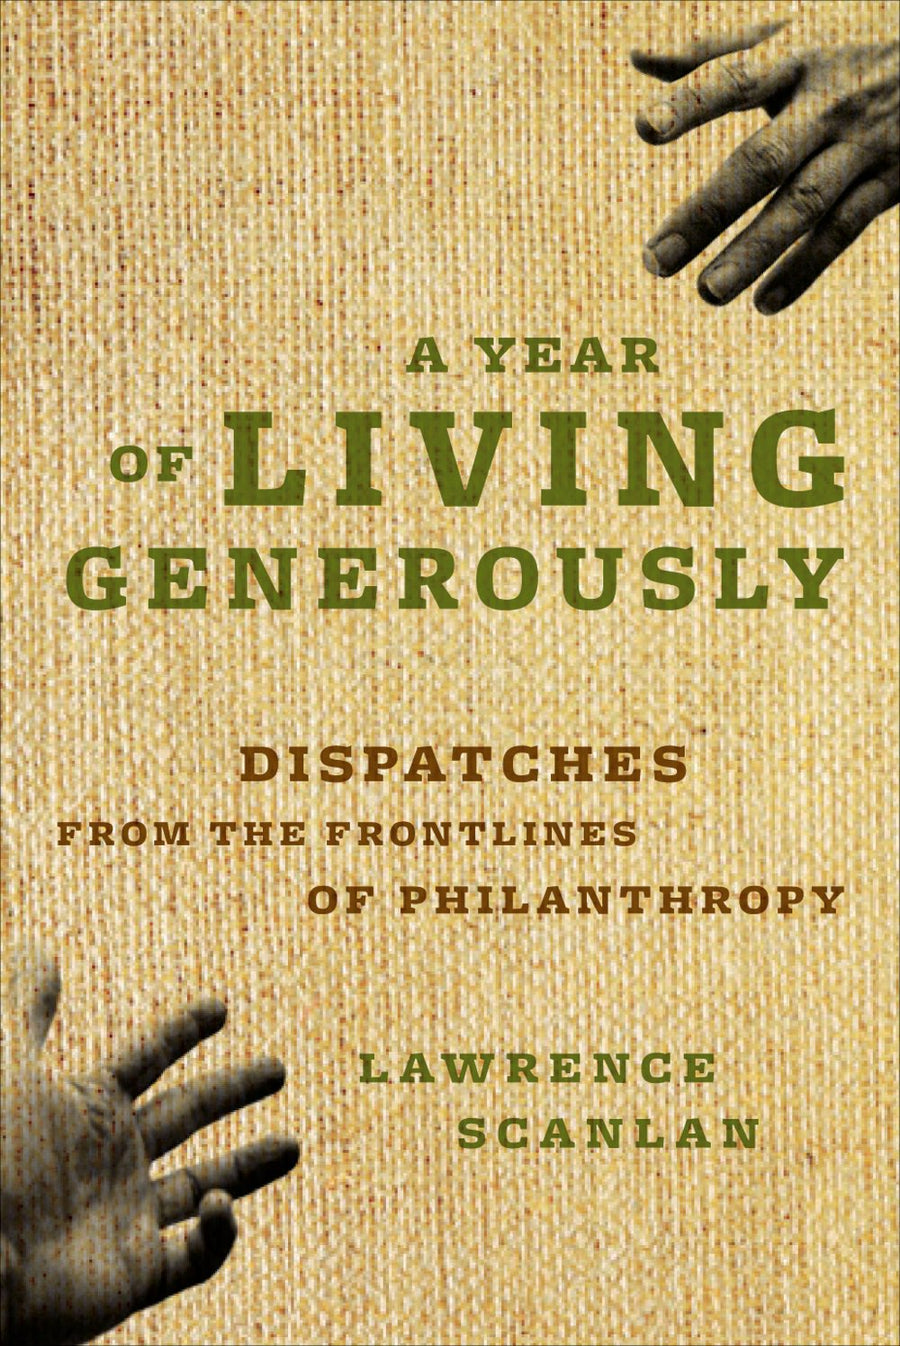 A Year of Living Generously : Dispatches from the Front Lines of Philanthropy